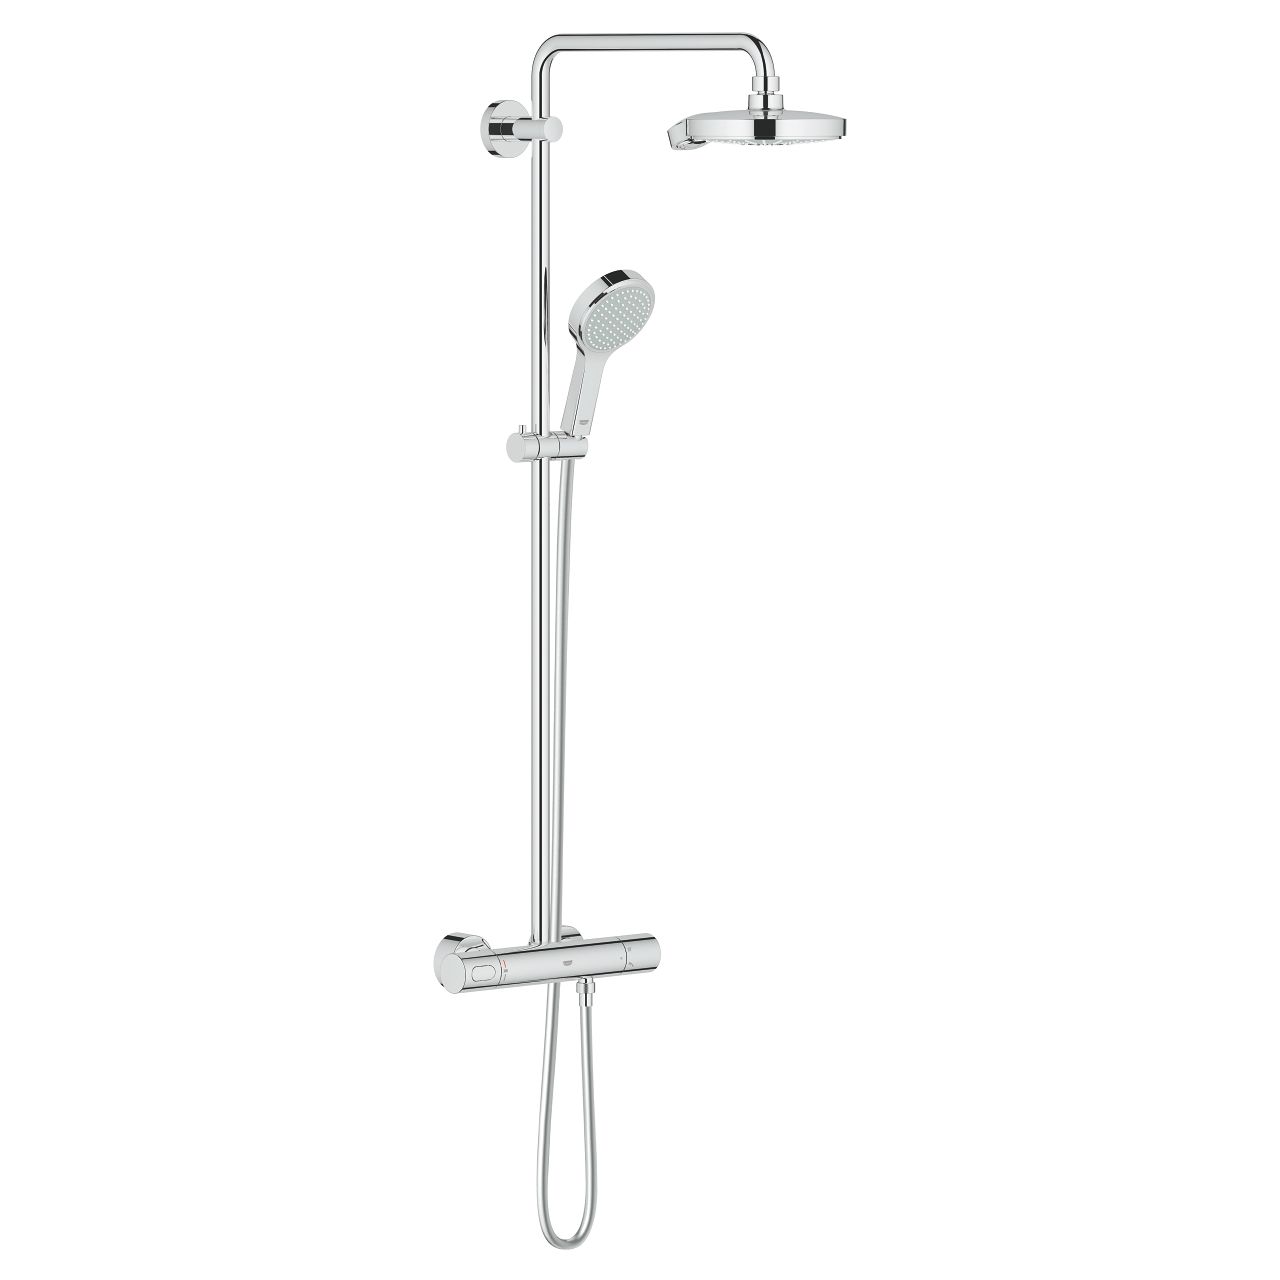  Grohe Power&Soul Cosmopolitan System 190 - 27903000 